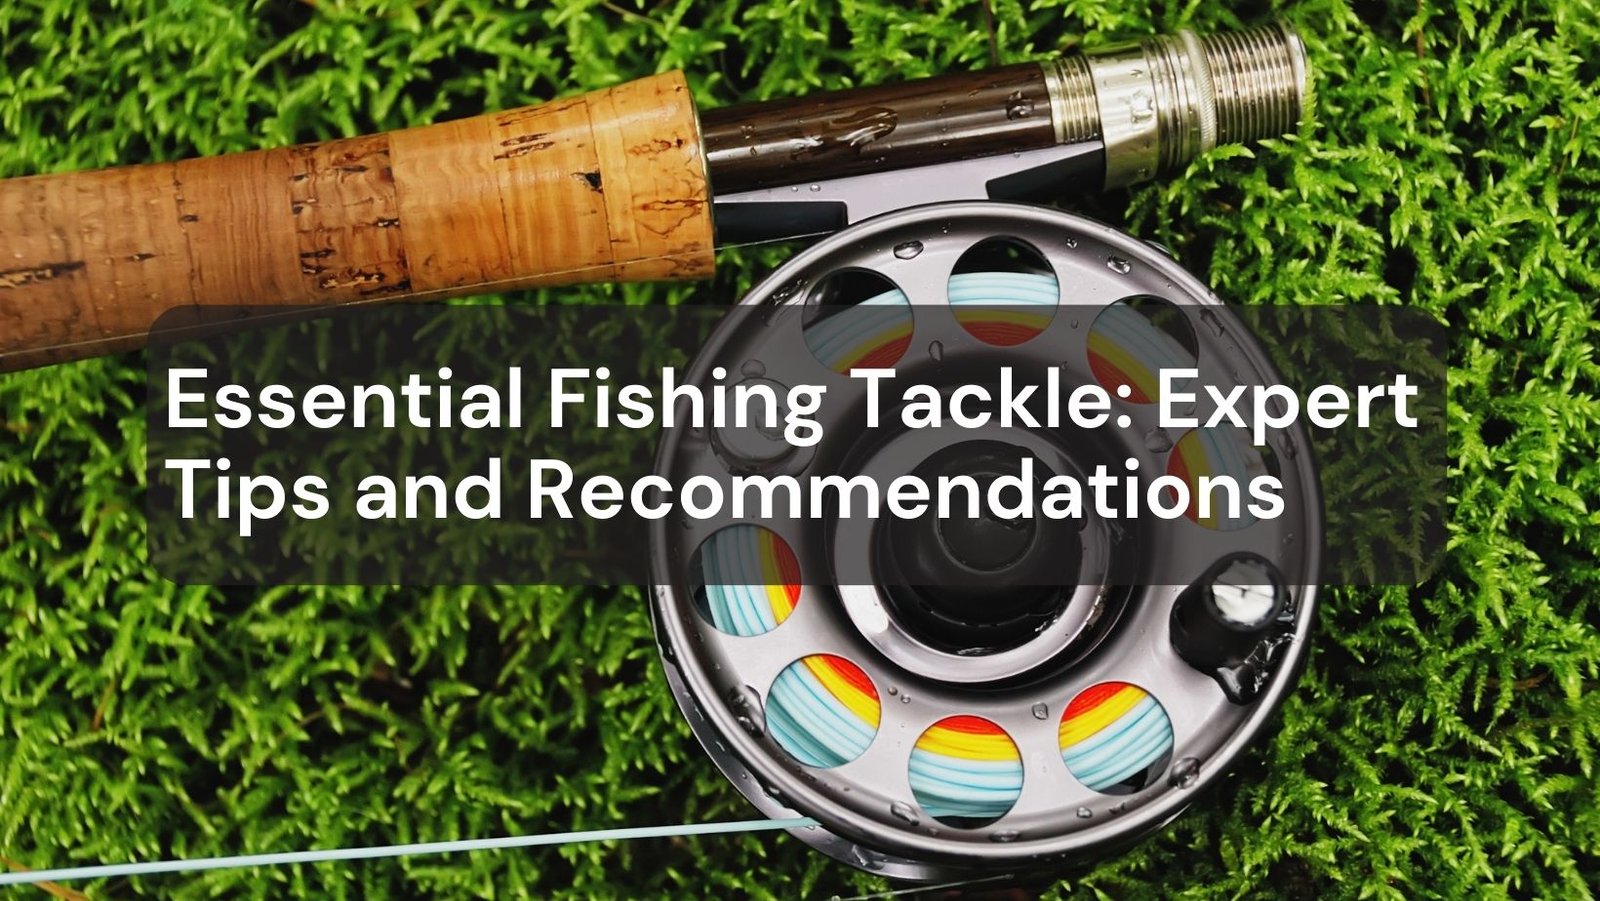 Essential Fishing Tackle: Expert Tips and Recommendations